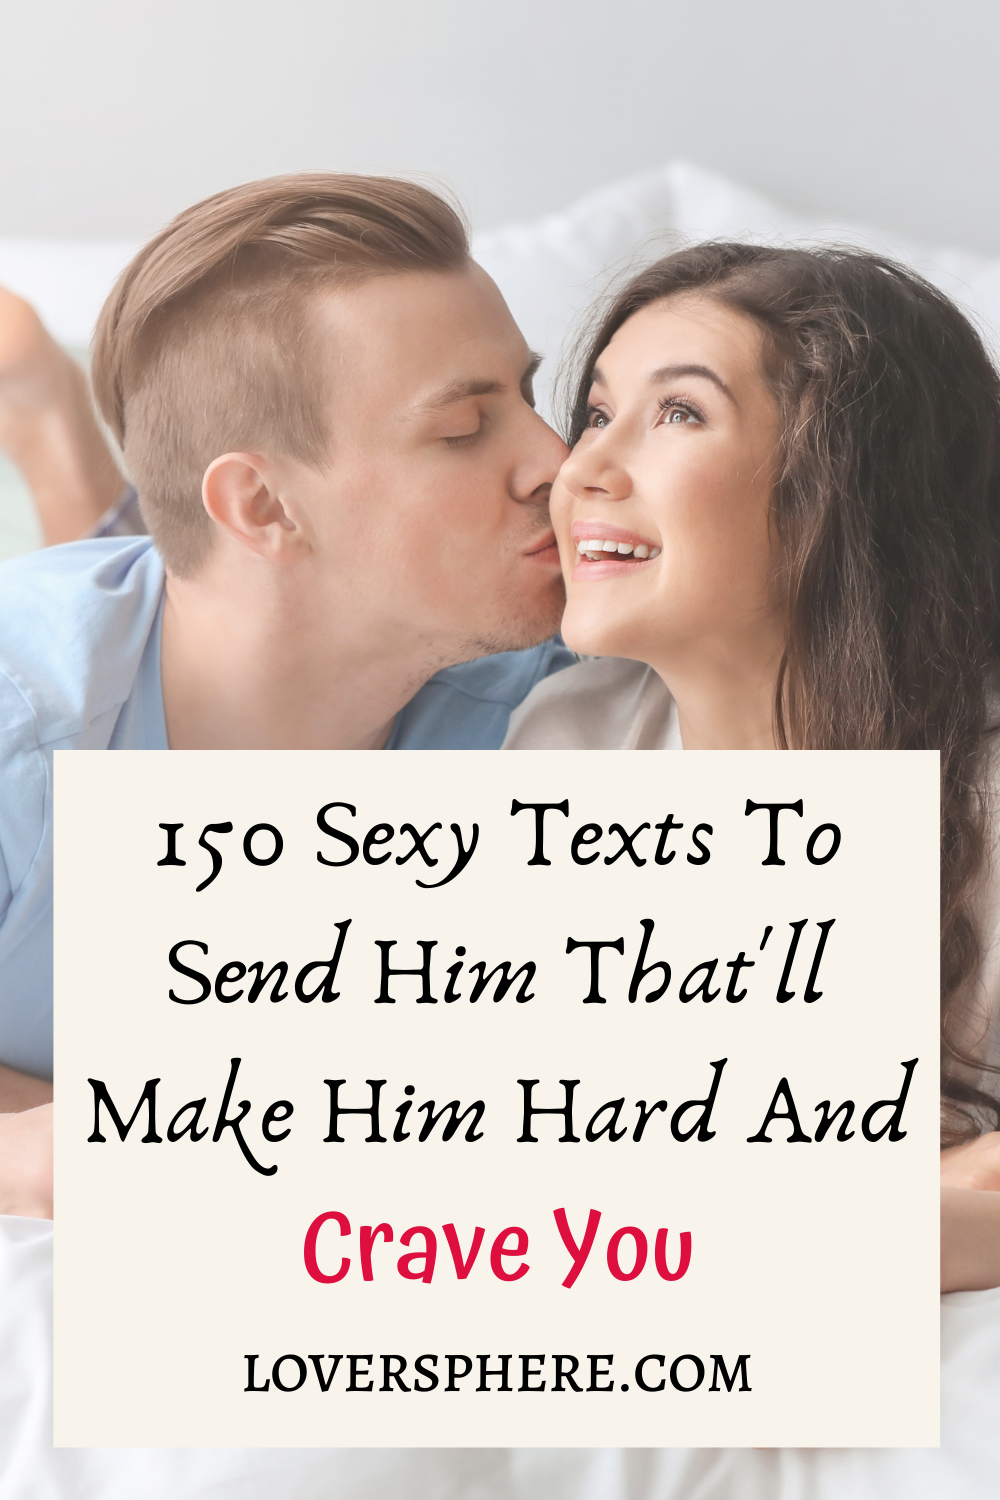 50 Flirty Texts To Send Him (With images) | Flirty texts 